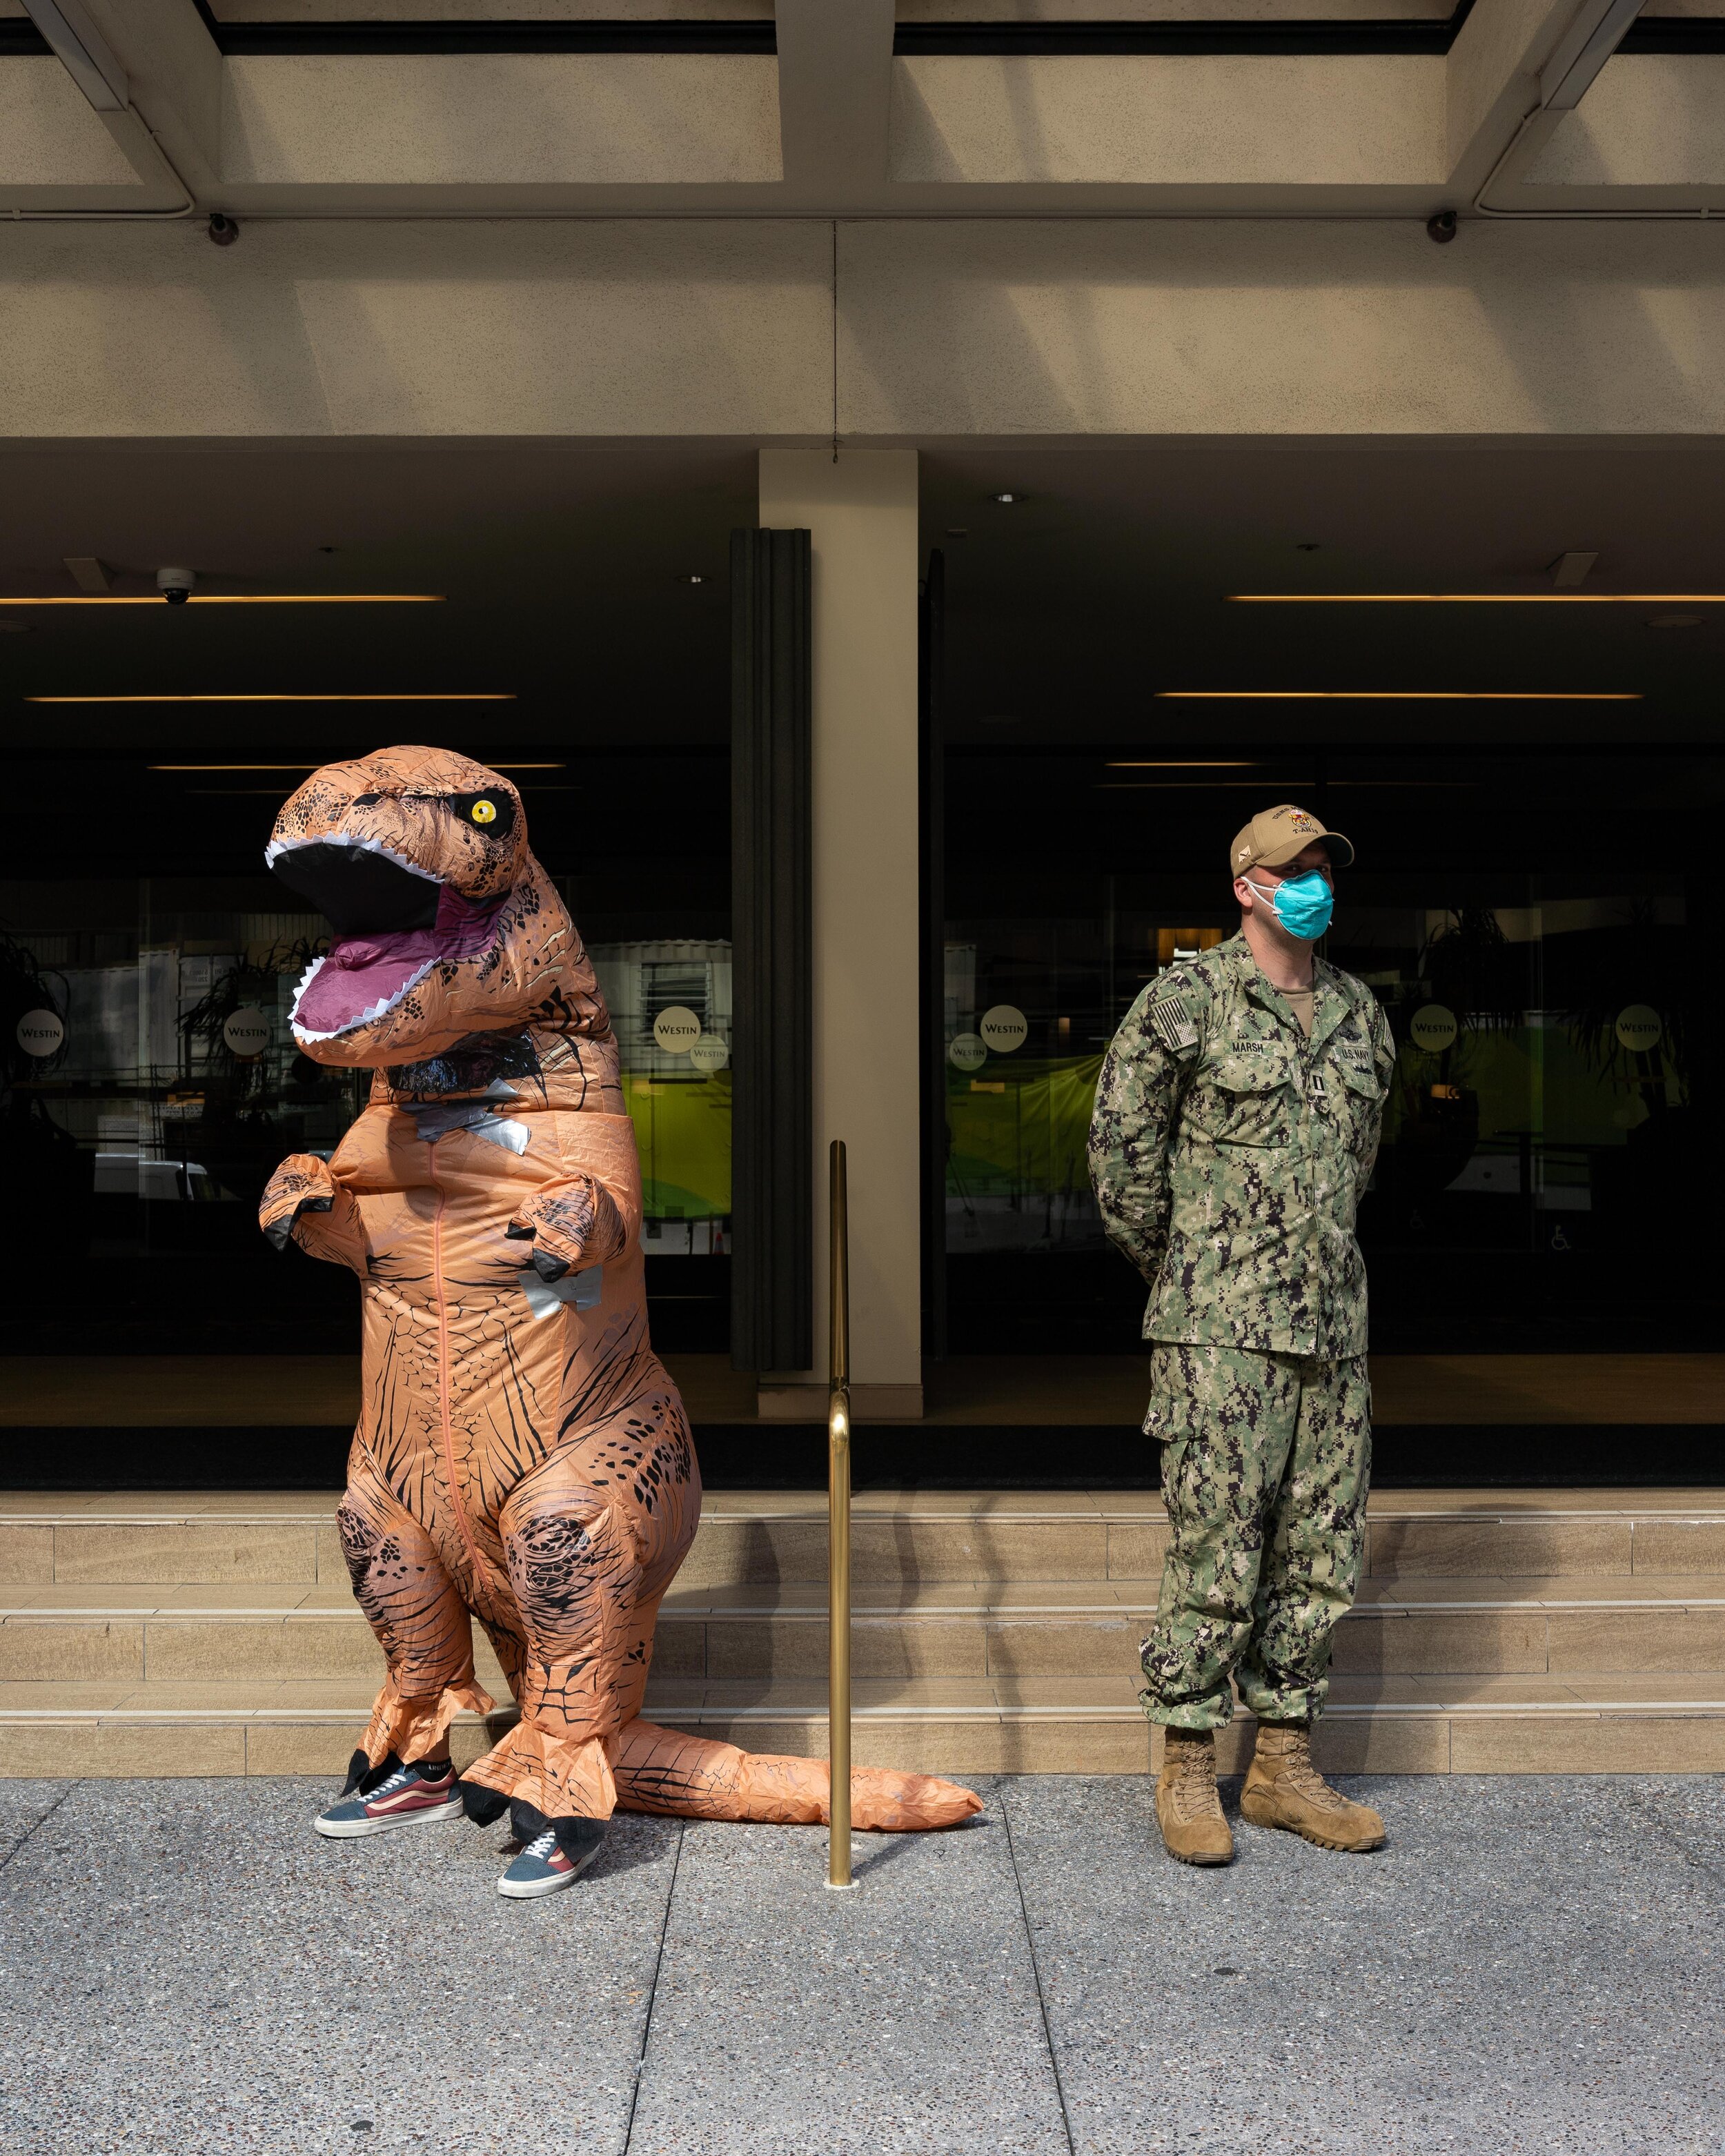  “My man in the suit is also named Patrick. We can do Dino Patrick and Nurse Patrick for the quote. That t-rex suit has been on a bunch of deployments to Afghanistan. The duct tape patches are the only thing keeping the air in.” - Nurse Patrick (Dino